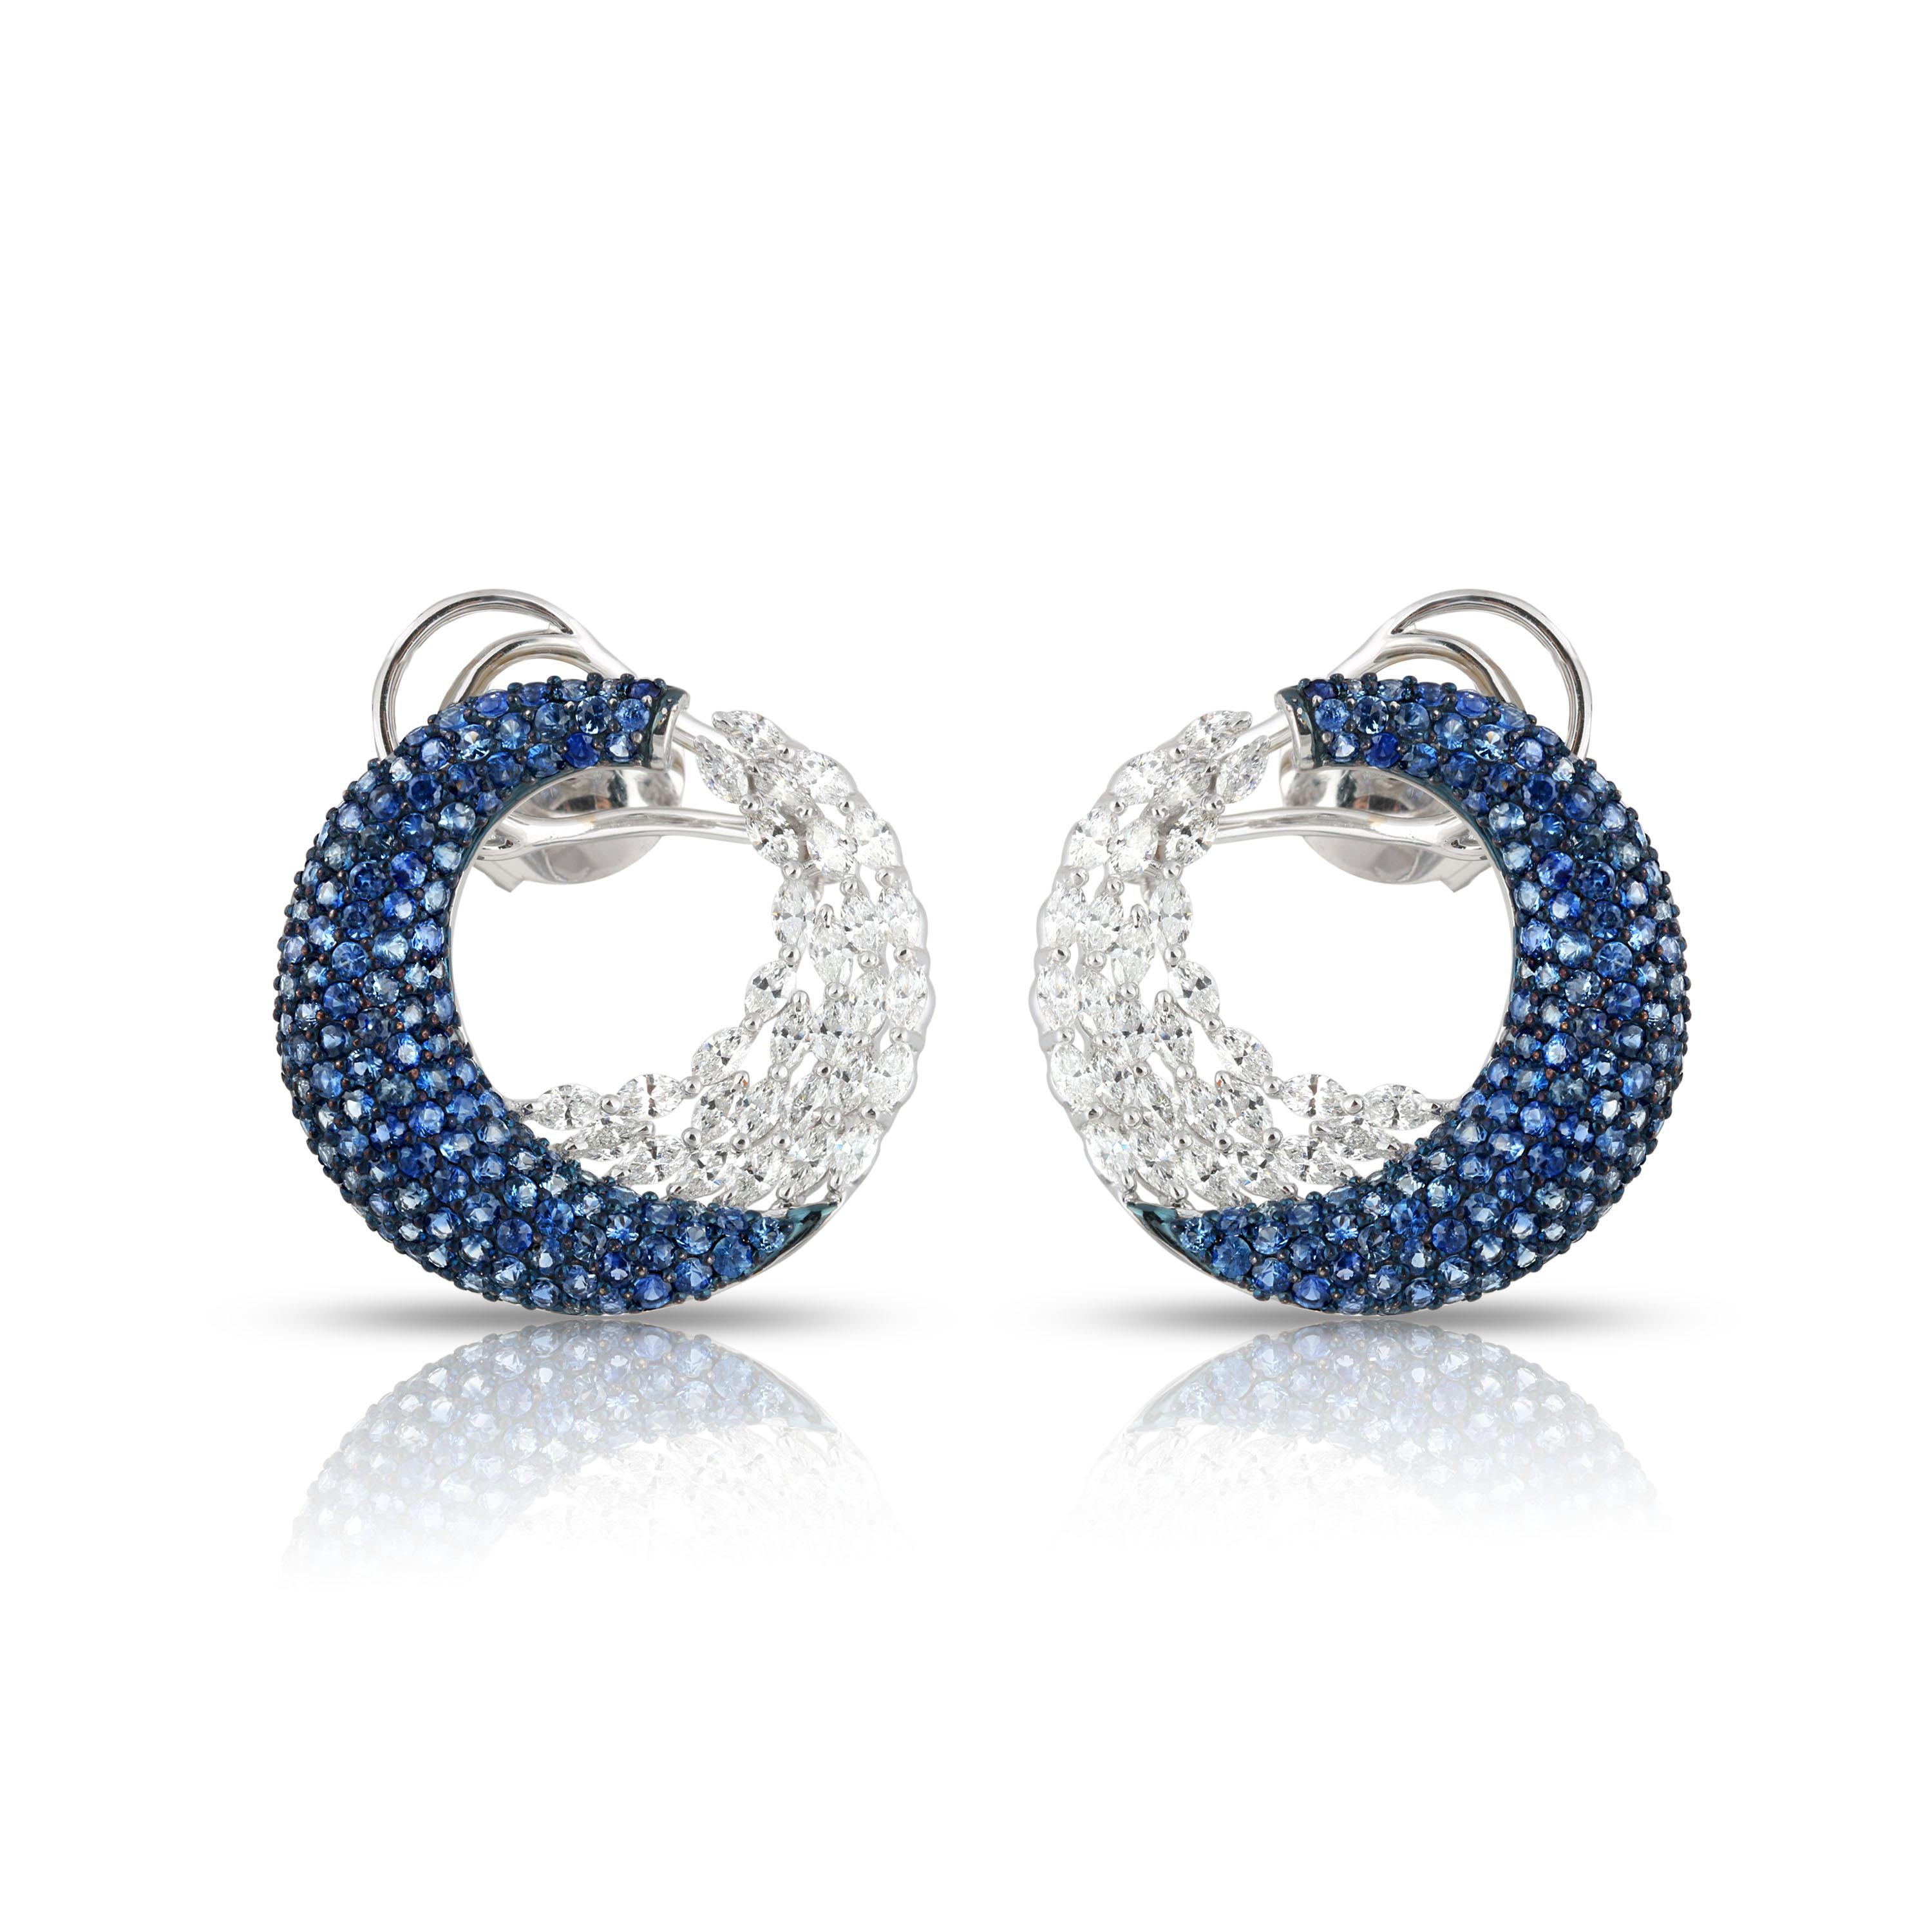 It is the ingenious amalgamation of meticulously selected brilliant cut marquise diamonds and blue sapphires that gives these broad hoops its aura of unique artistry. The 320 stones have been used in a combination of pavé and prong settings in an